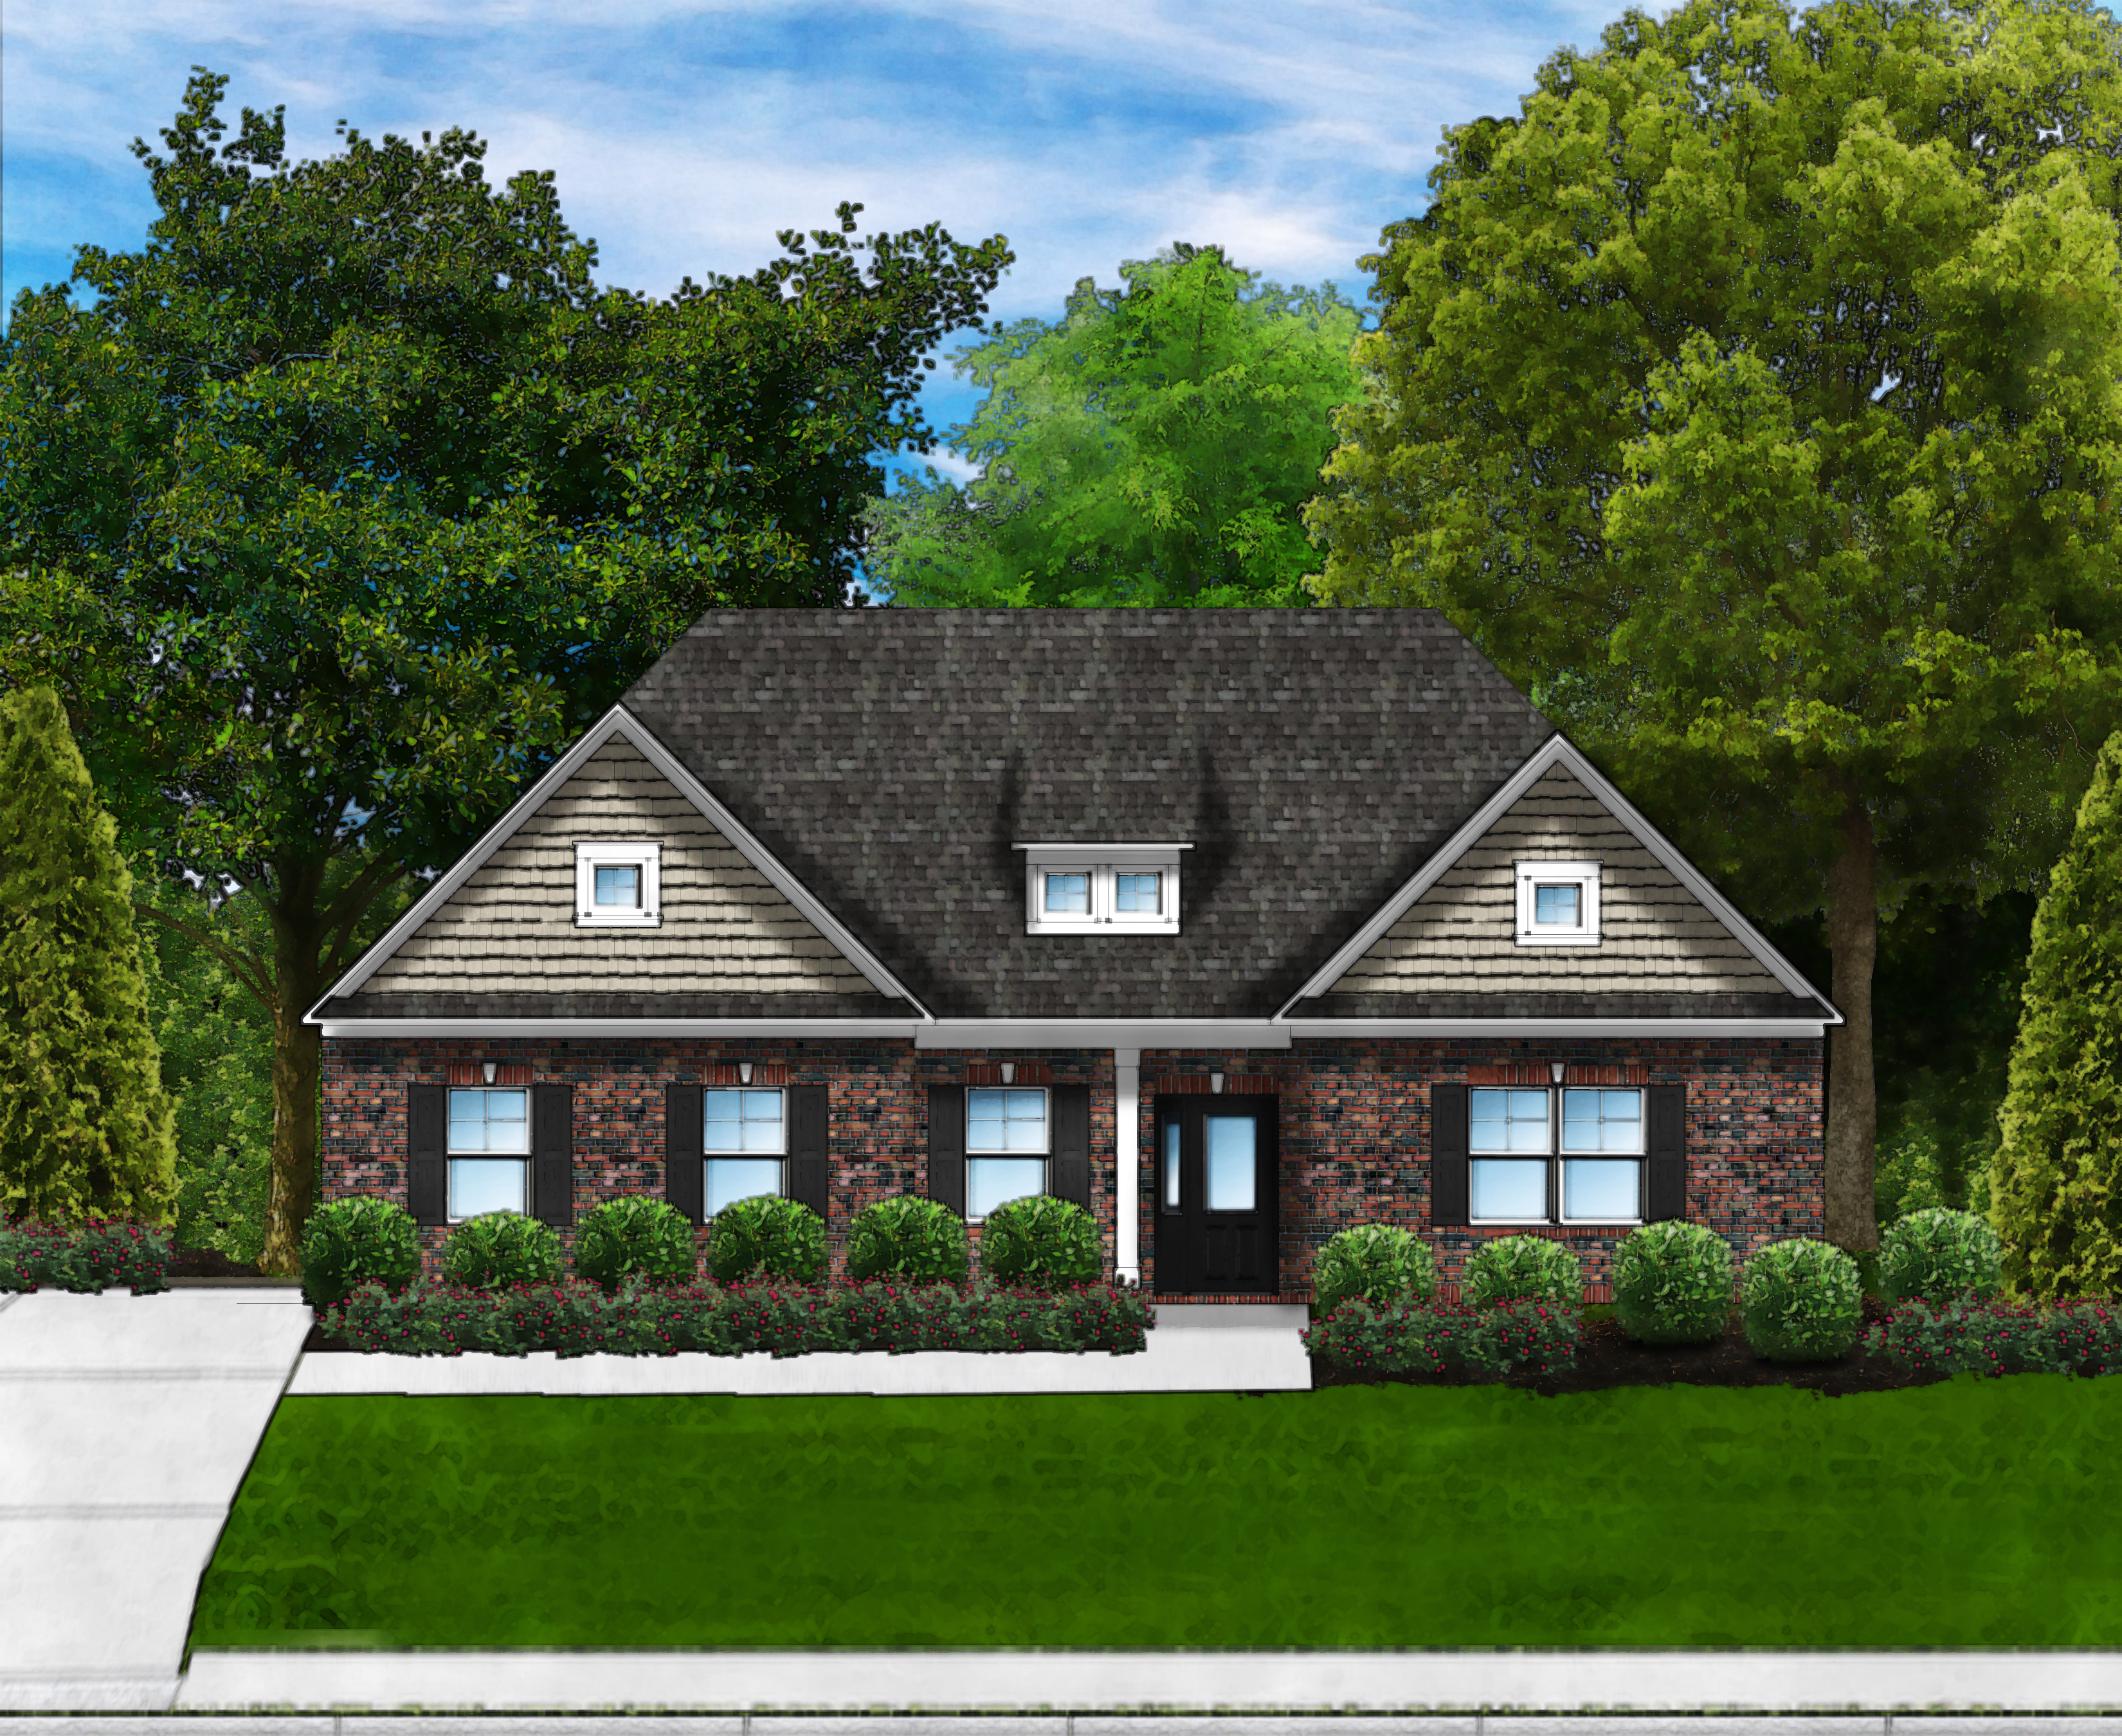 Marsh Bay D4 (Brick Front) by Great Southern Homes